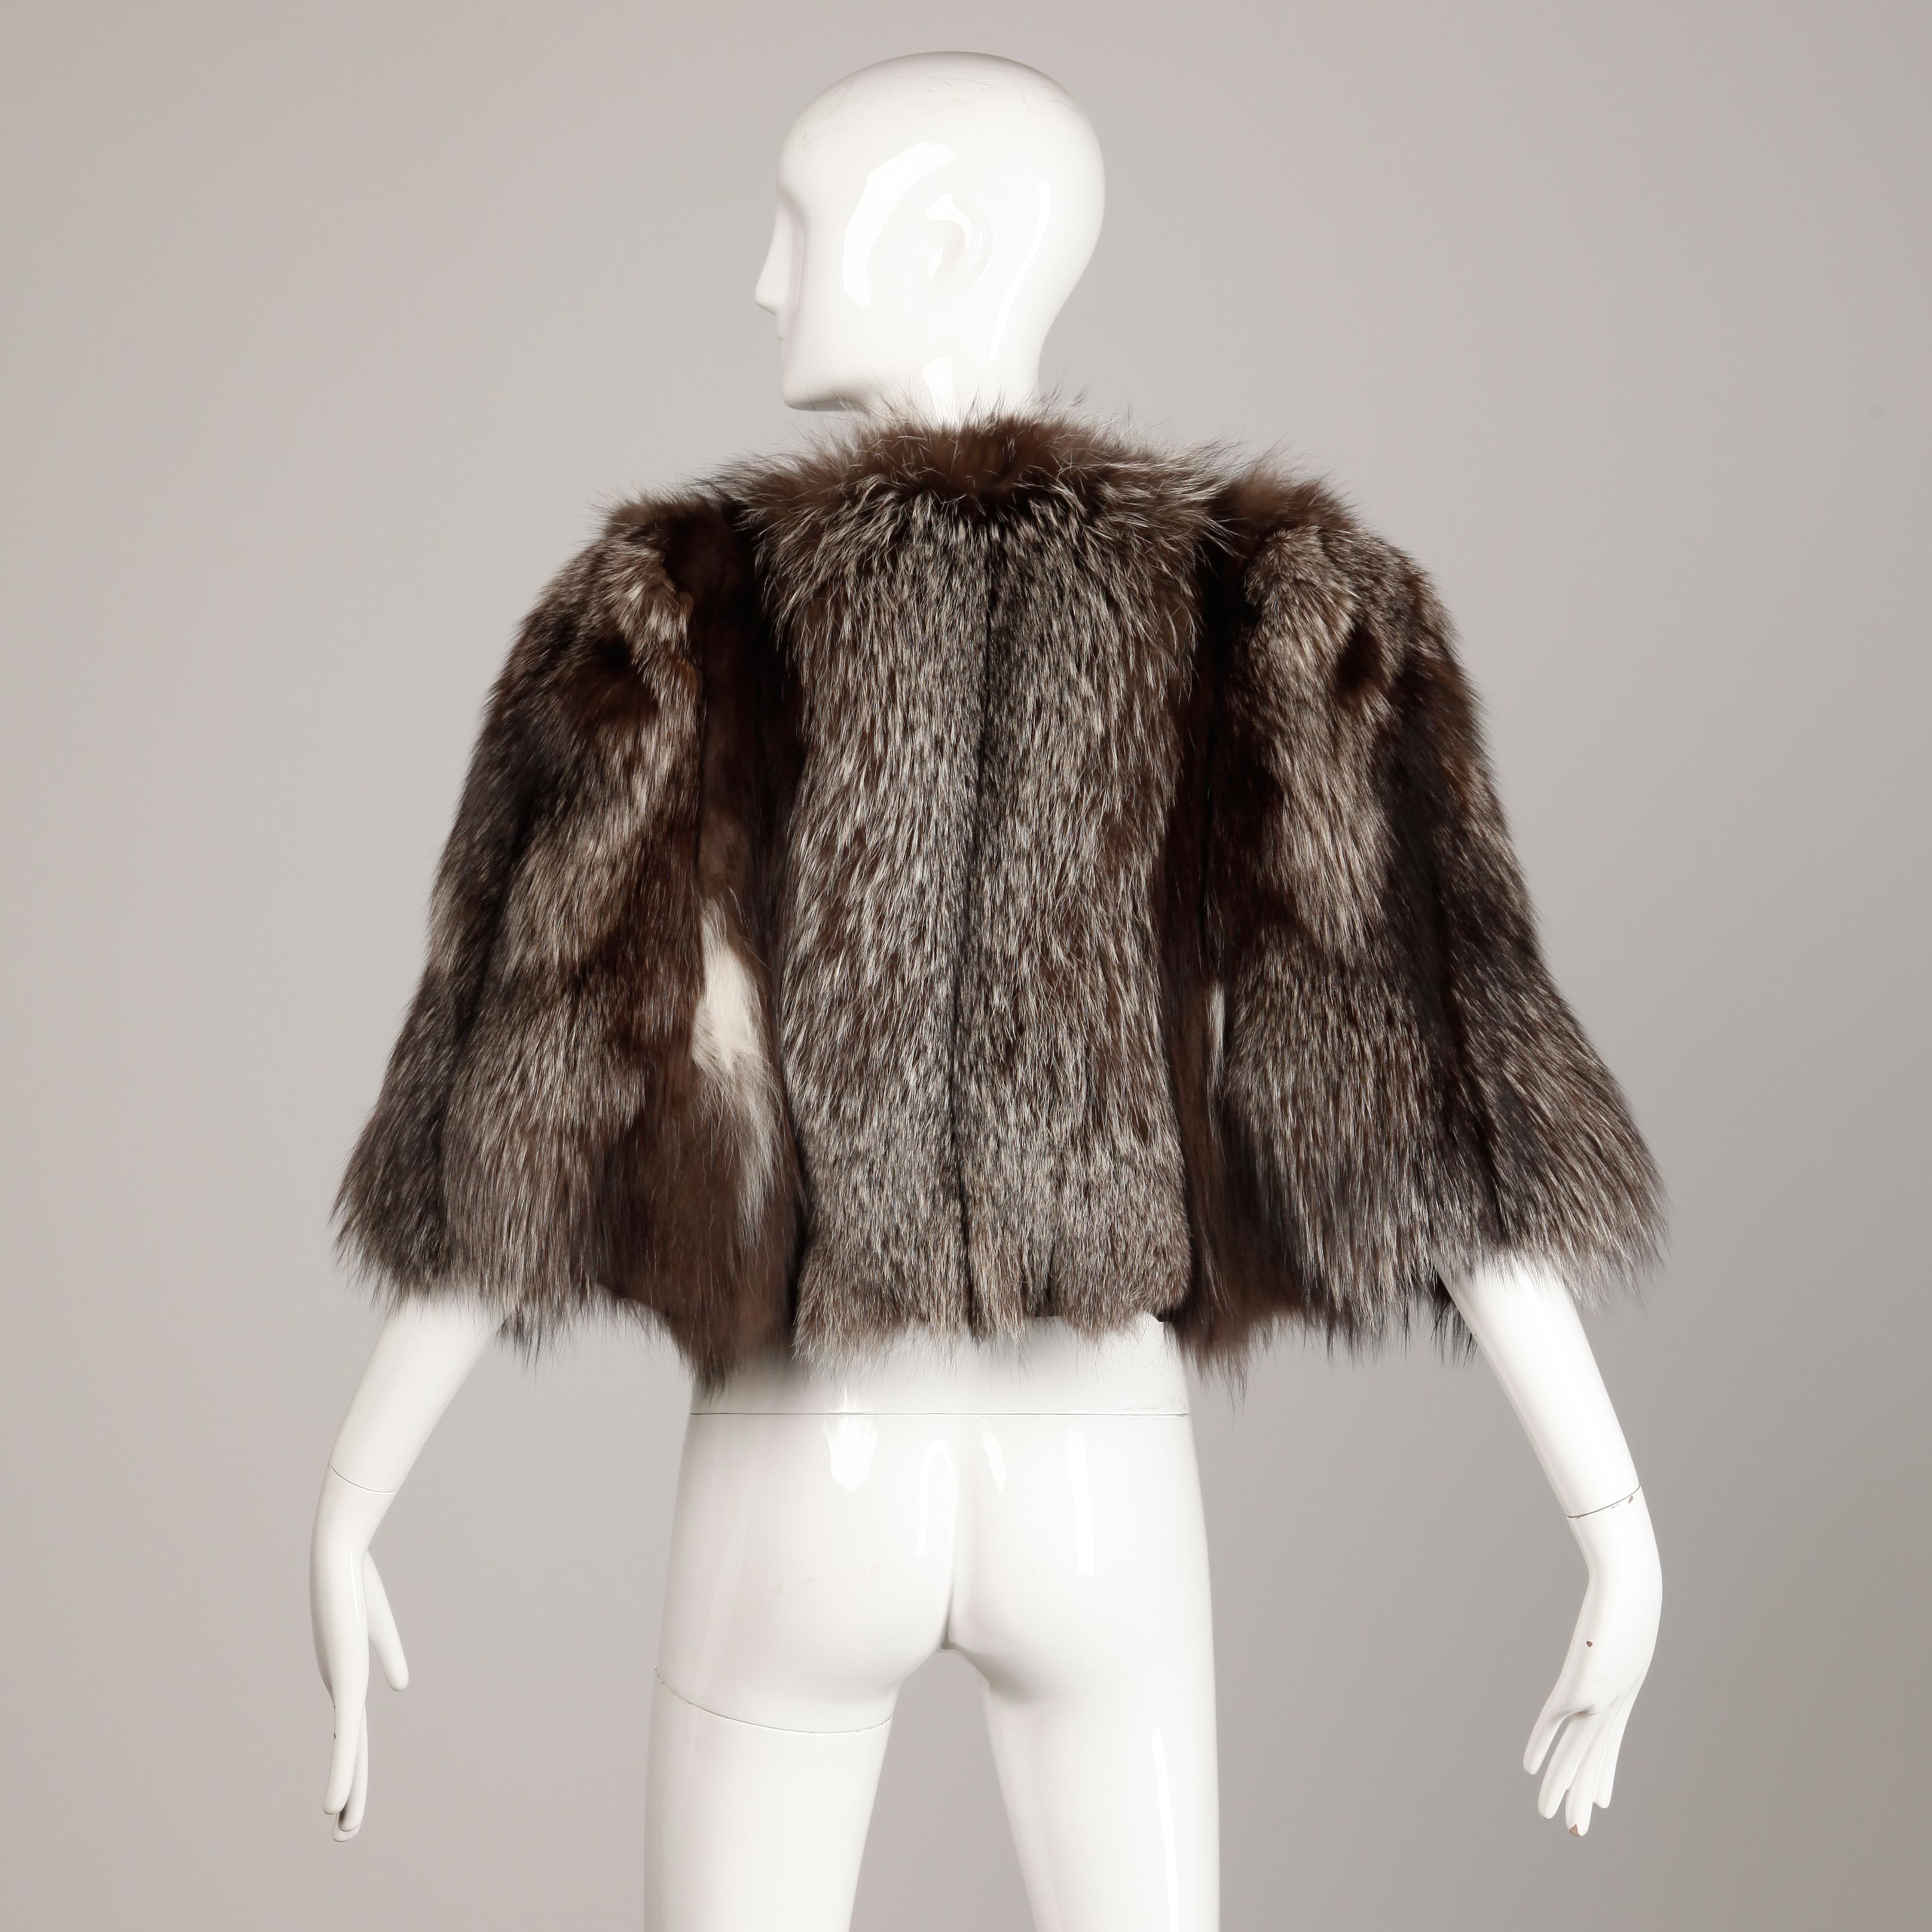 Beautiful vintage 1940s crystal fox fur cape with arm slits and black satin lining. Gorgeous coloring with a flattering design. Excellent vintage condition with normal signs of wear for a fur of this age. One of the arm straps is missing from the